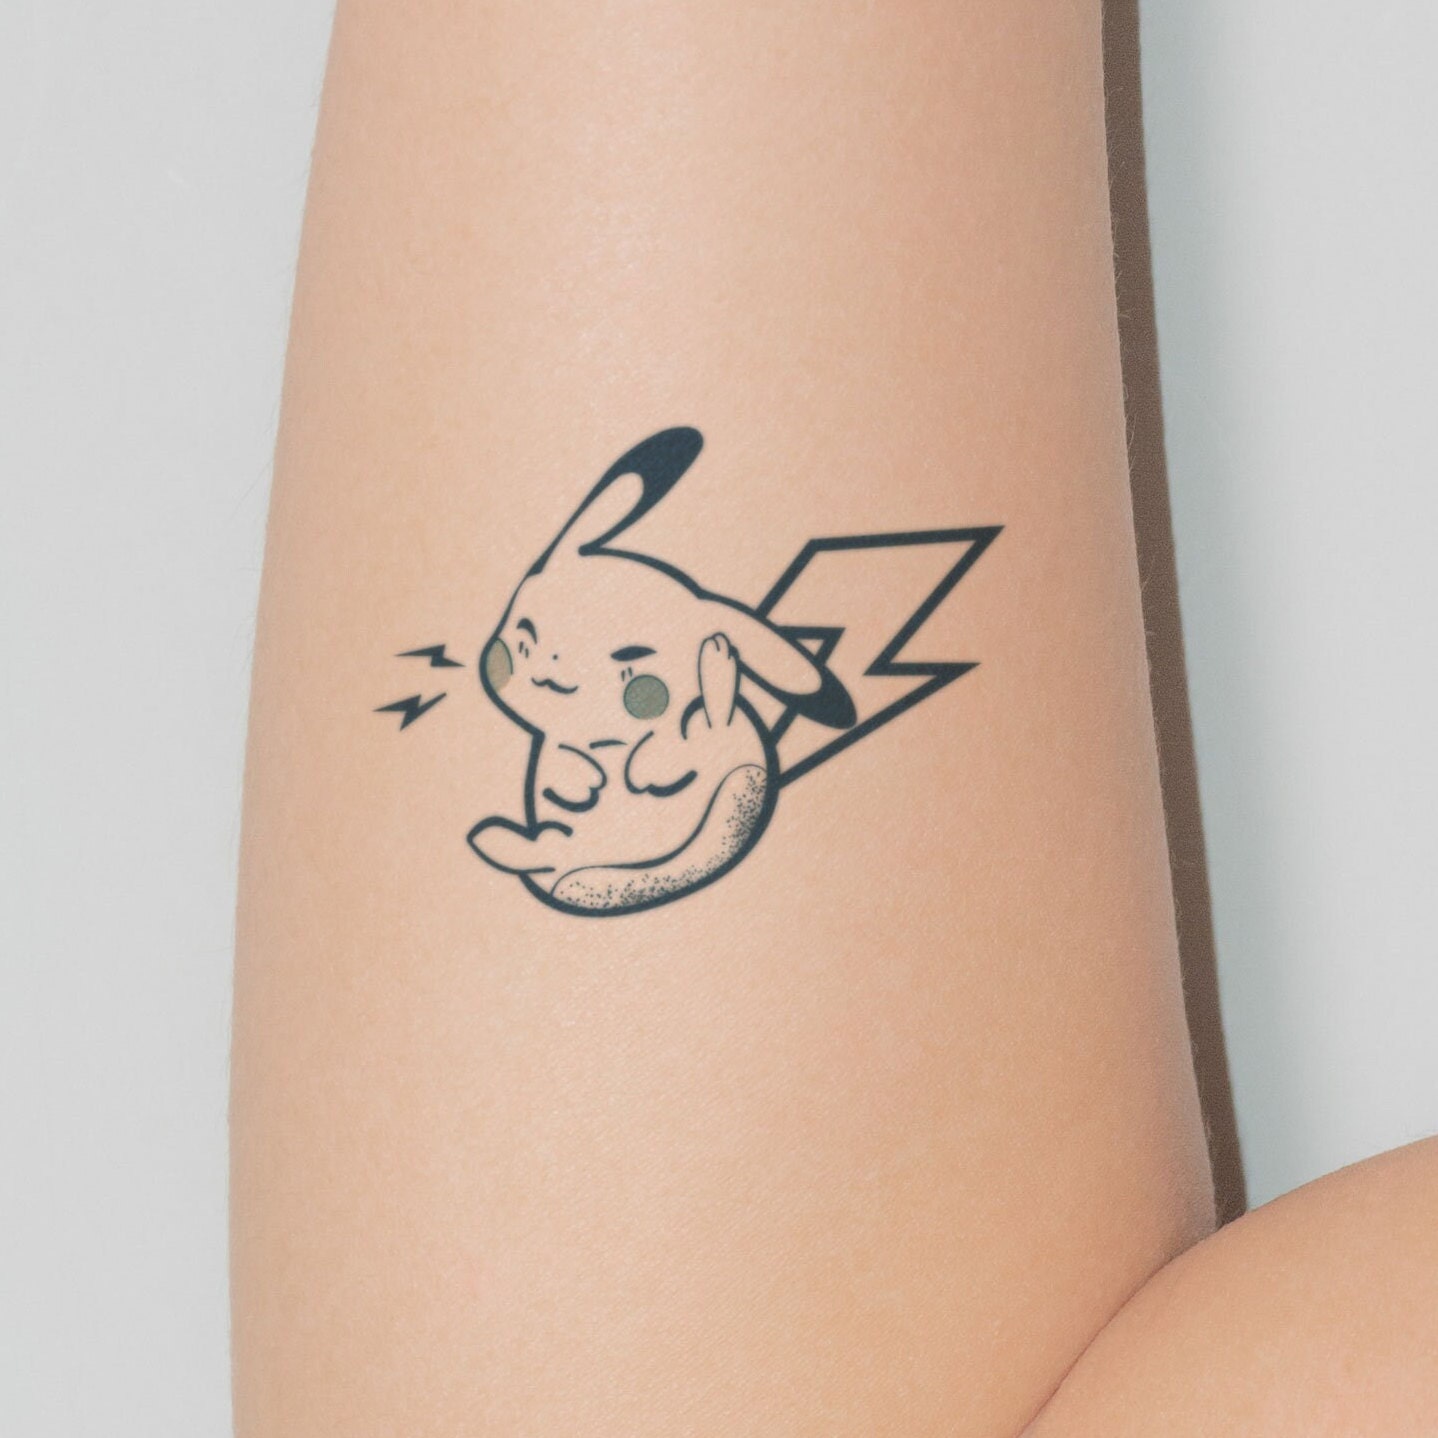 Orpinkton tattoo and piercing  Lovely negativespace pikachu done by our  amazing and talaned artist aleksgtattooart DM us if you would like  something similar or you have any tattoo ideas check out